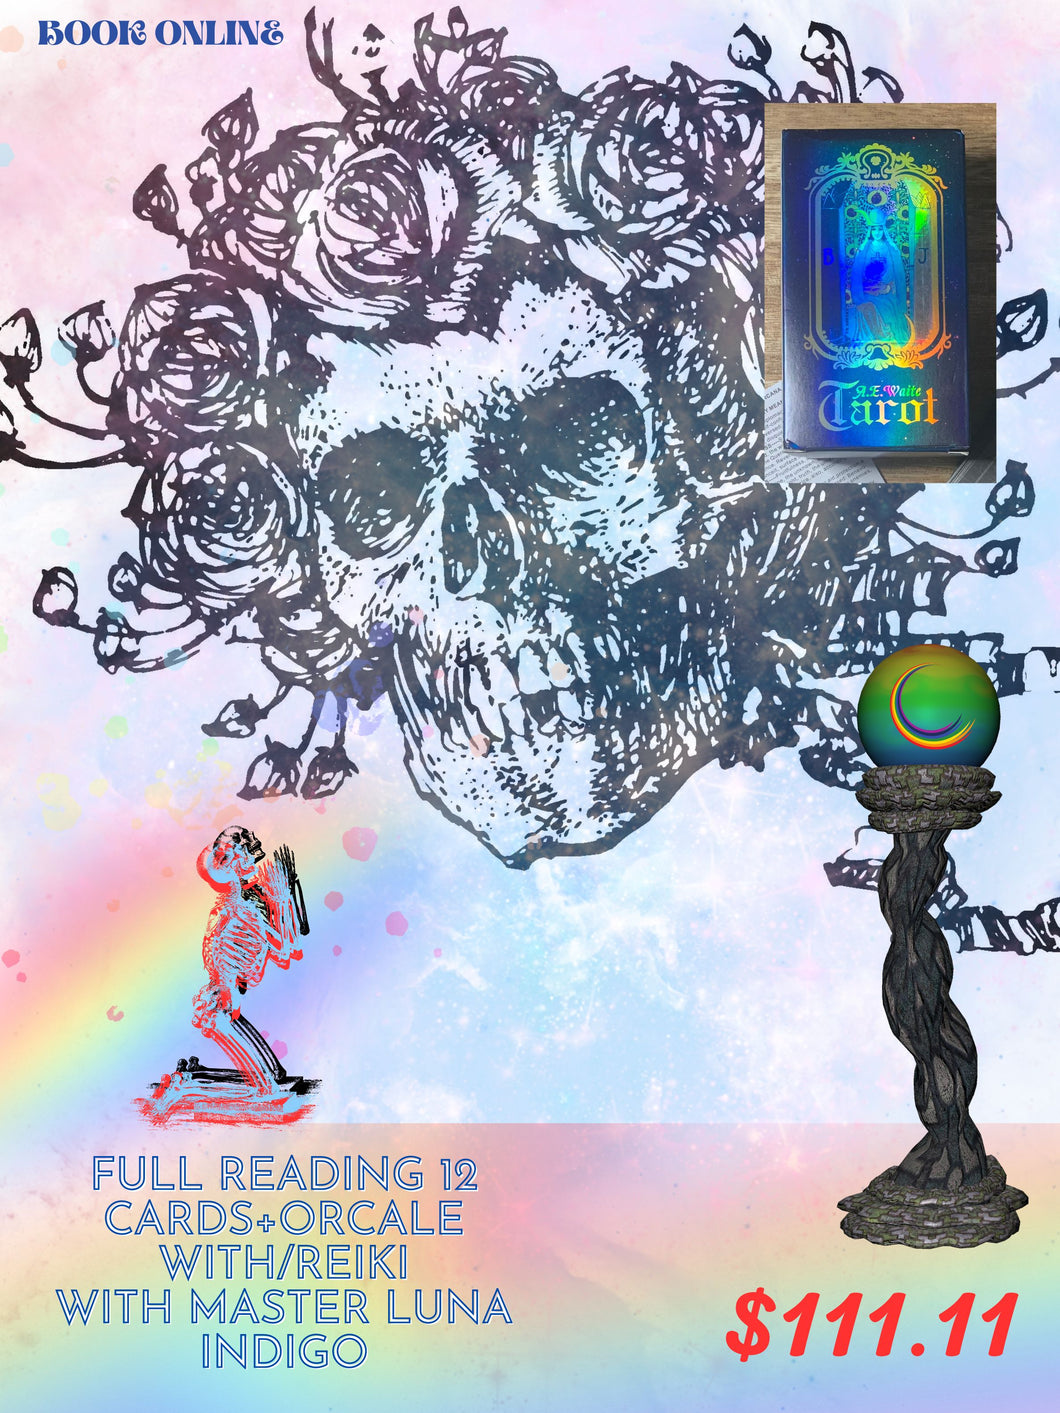 SKIP THE LINE DEAD AND CO TAROT PASS FULL READINGS ONLY: